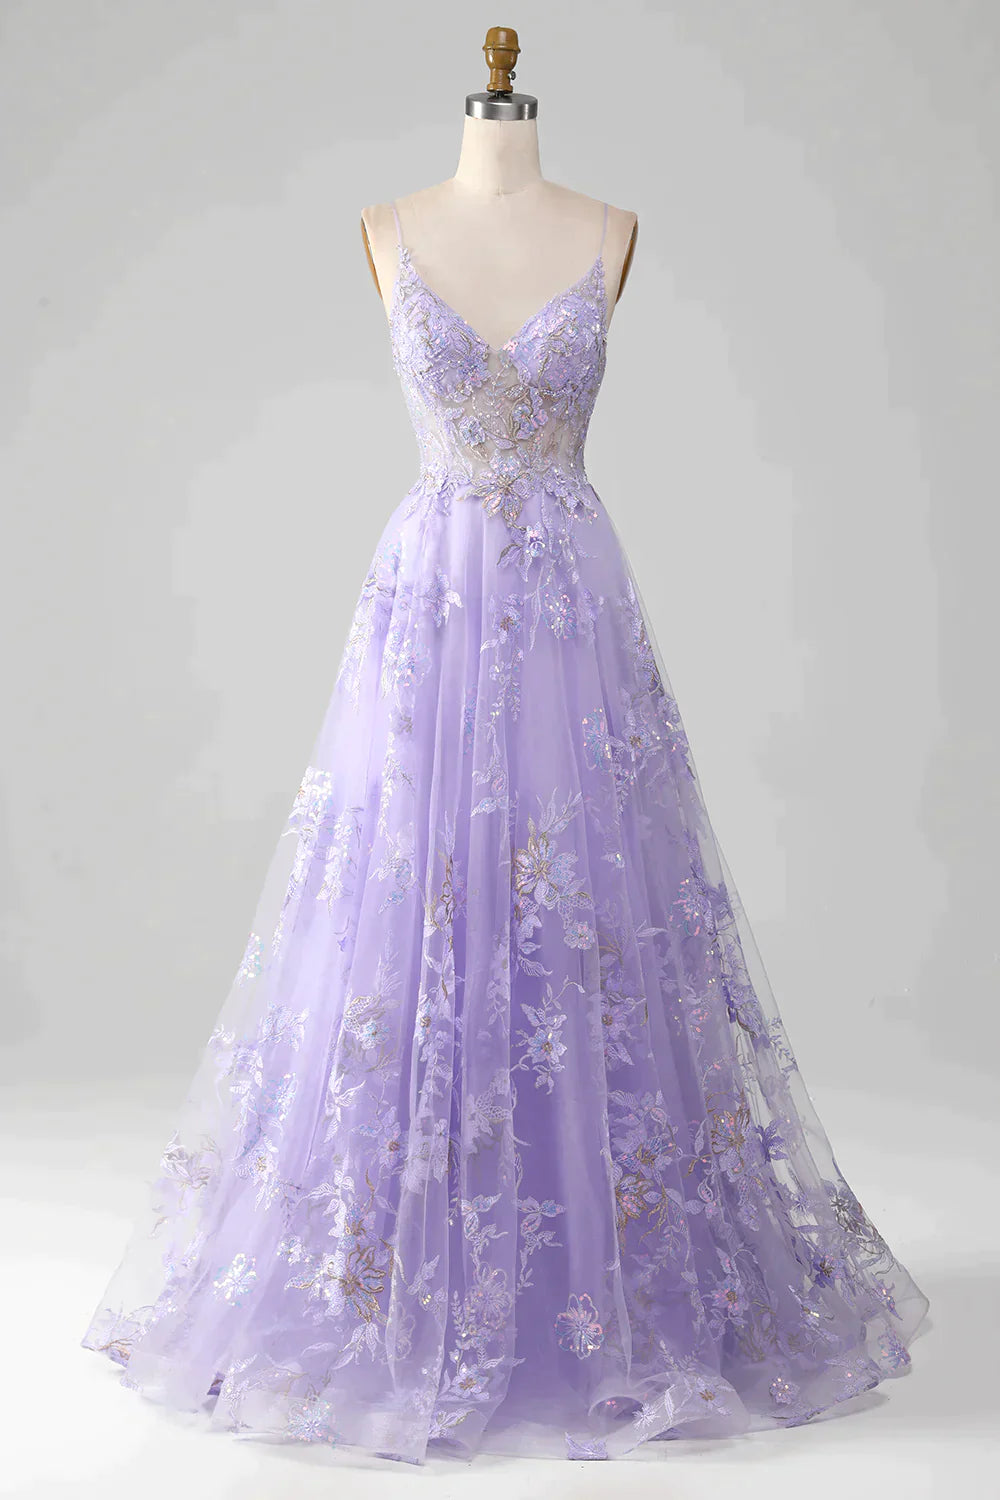 Romantic Purple A Line Spaghetti Straps Long Tulle Prom Dress With Appliques